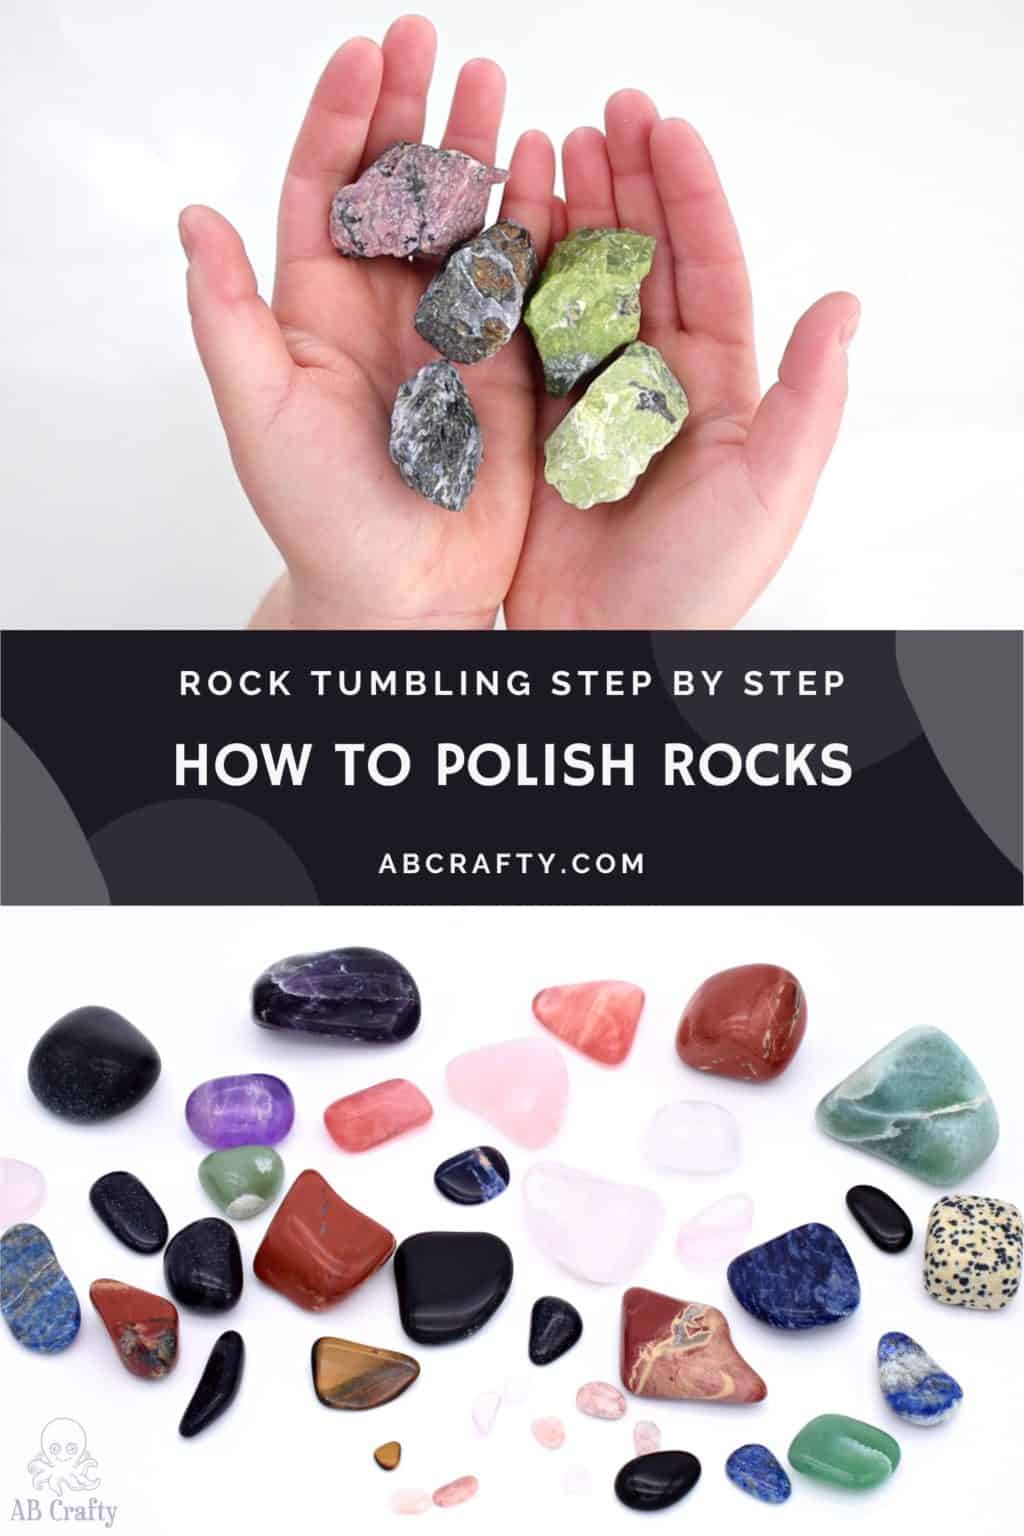 How to Polish Rocks with a Rock Tumbler - The Crafty Blog Stalker